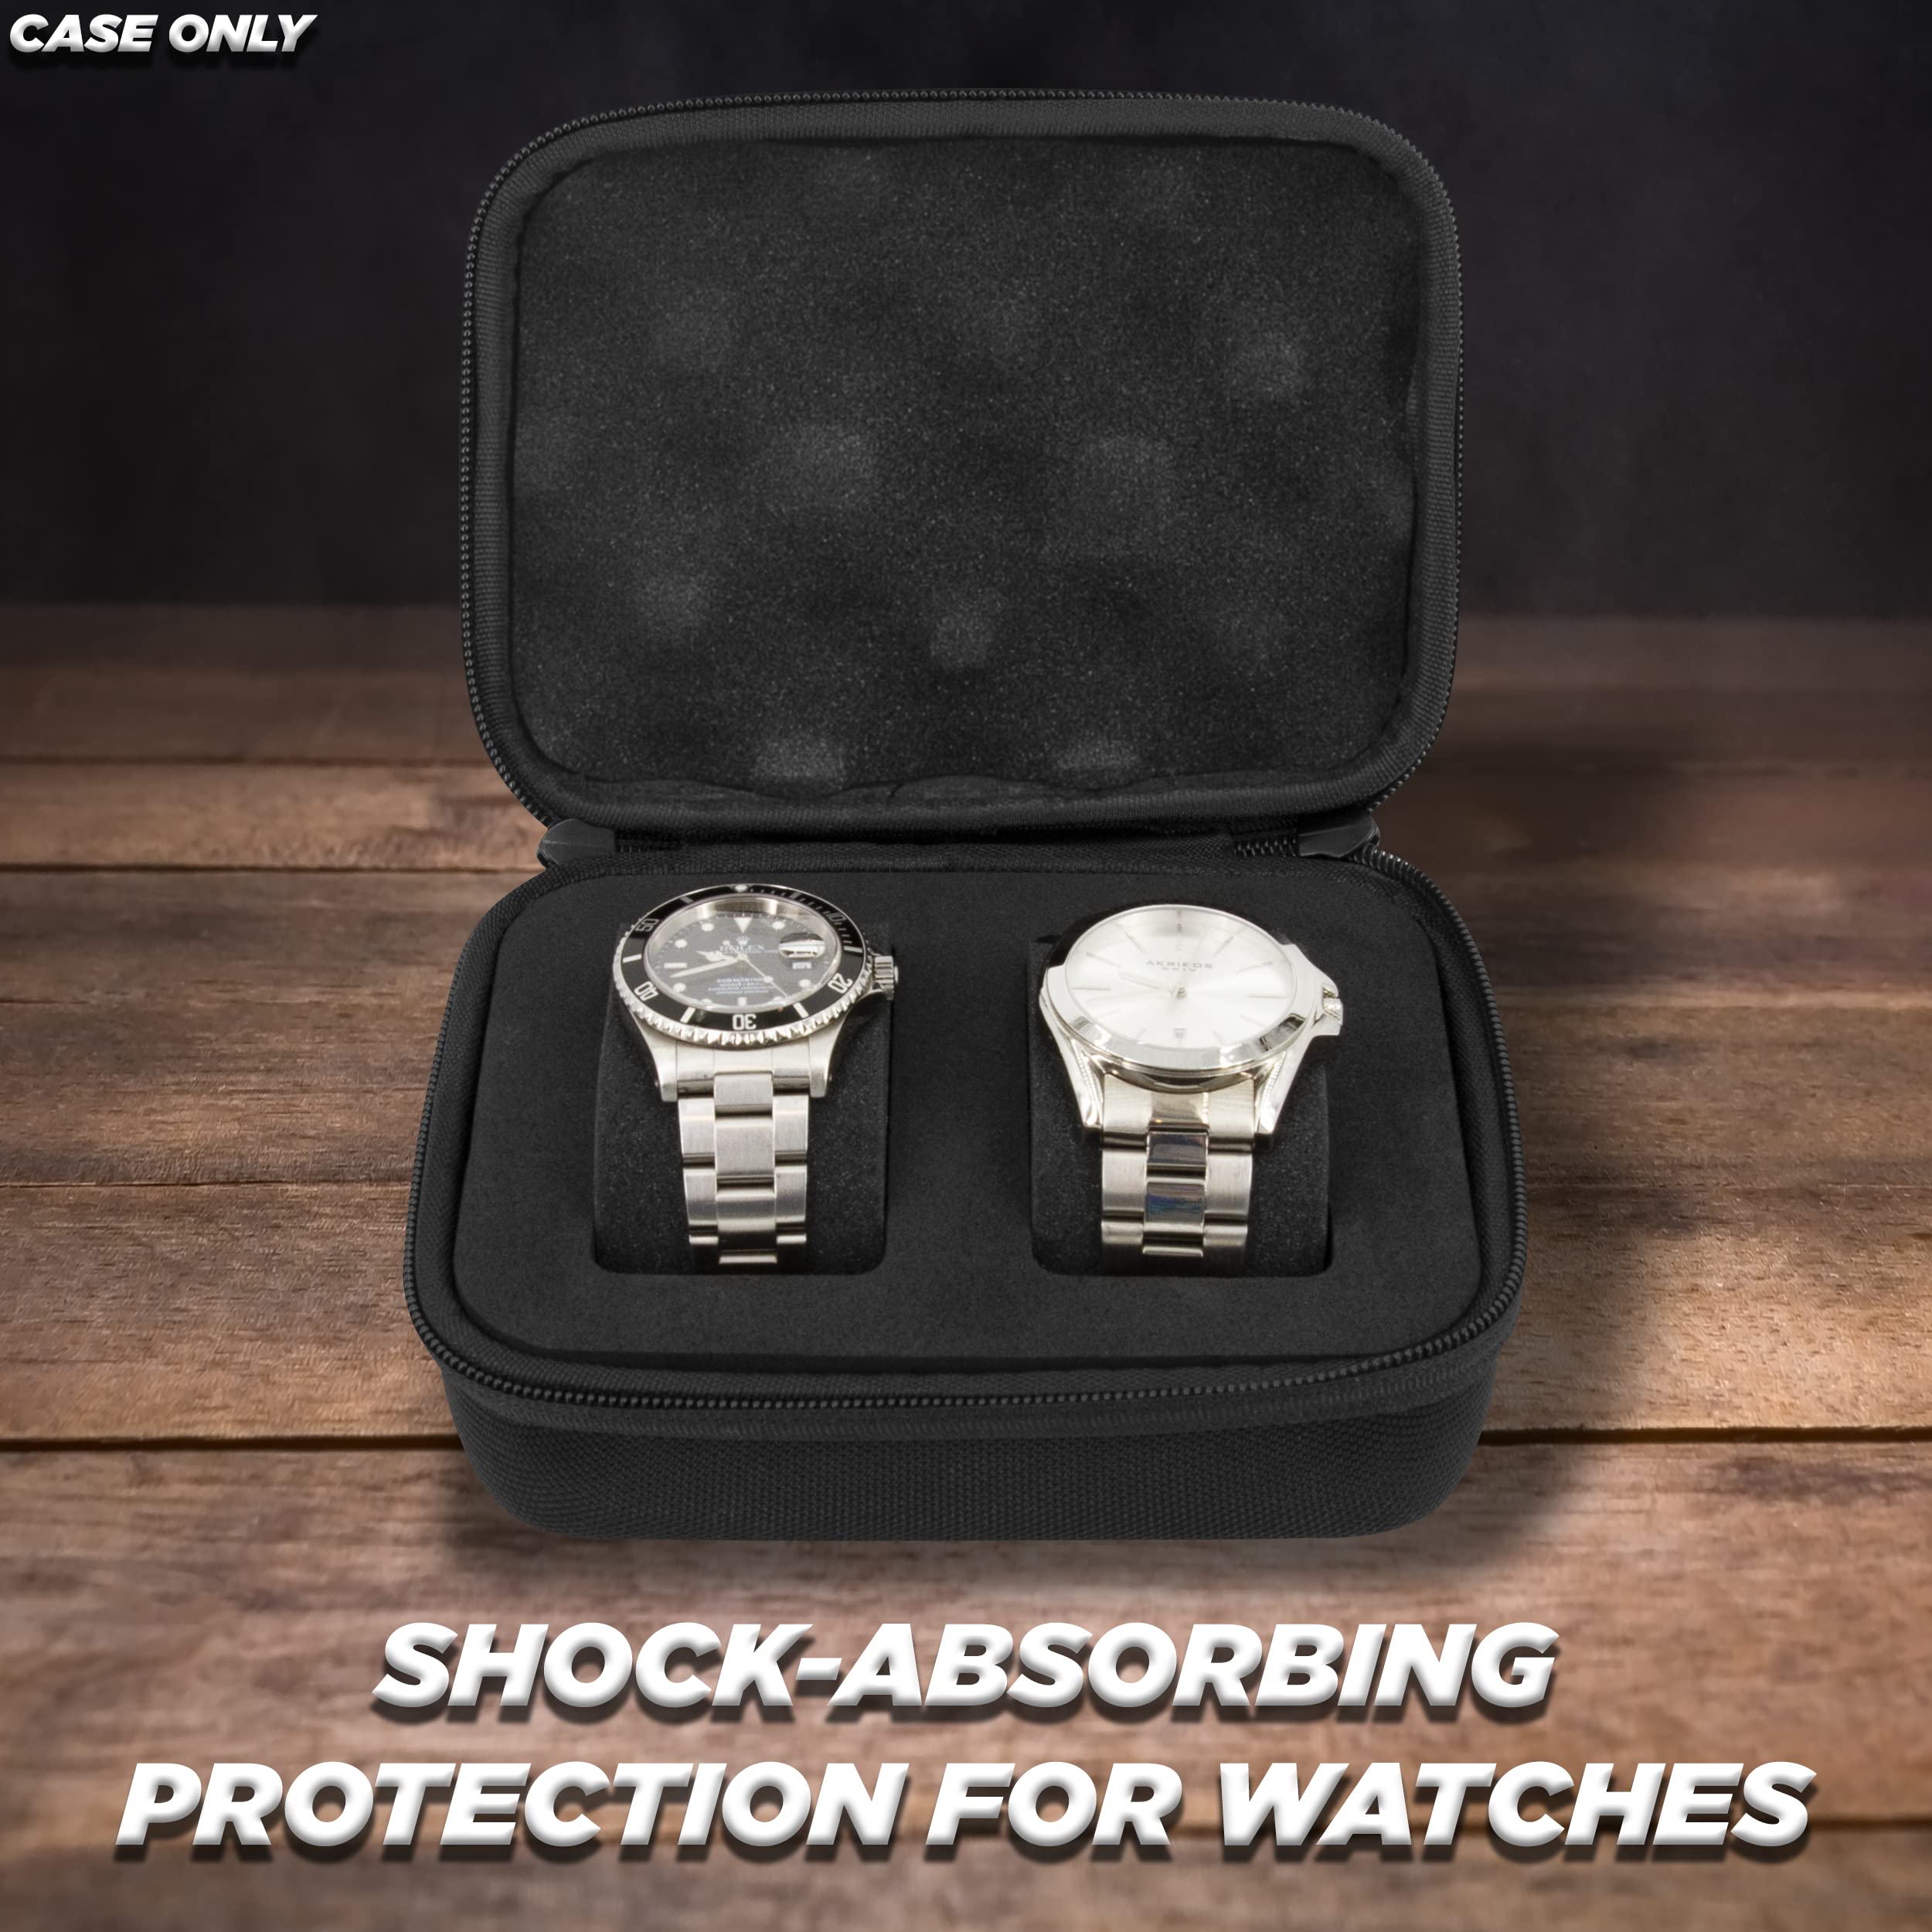 CASEMATIX Watch Travel Case for Two Watches with Hard Shell Exterior, Plush Foam Cushions and Carry Handle - Protective Watch Box for Travel and Watch Case for Storage, Case Only